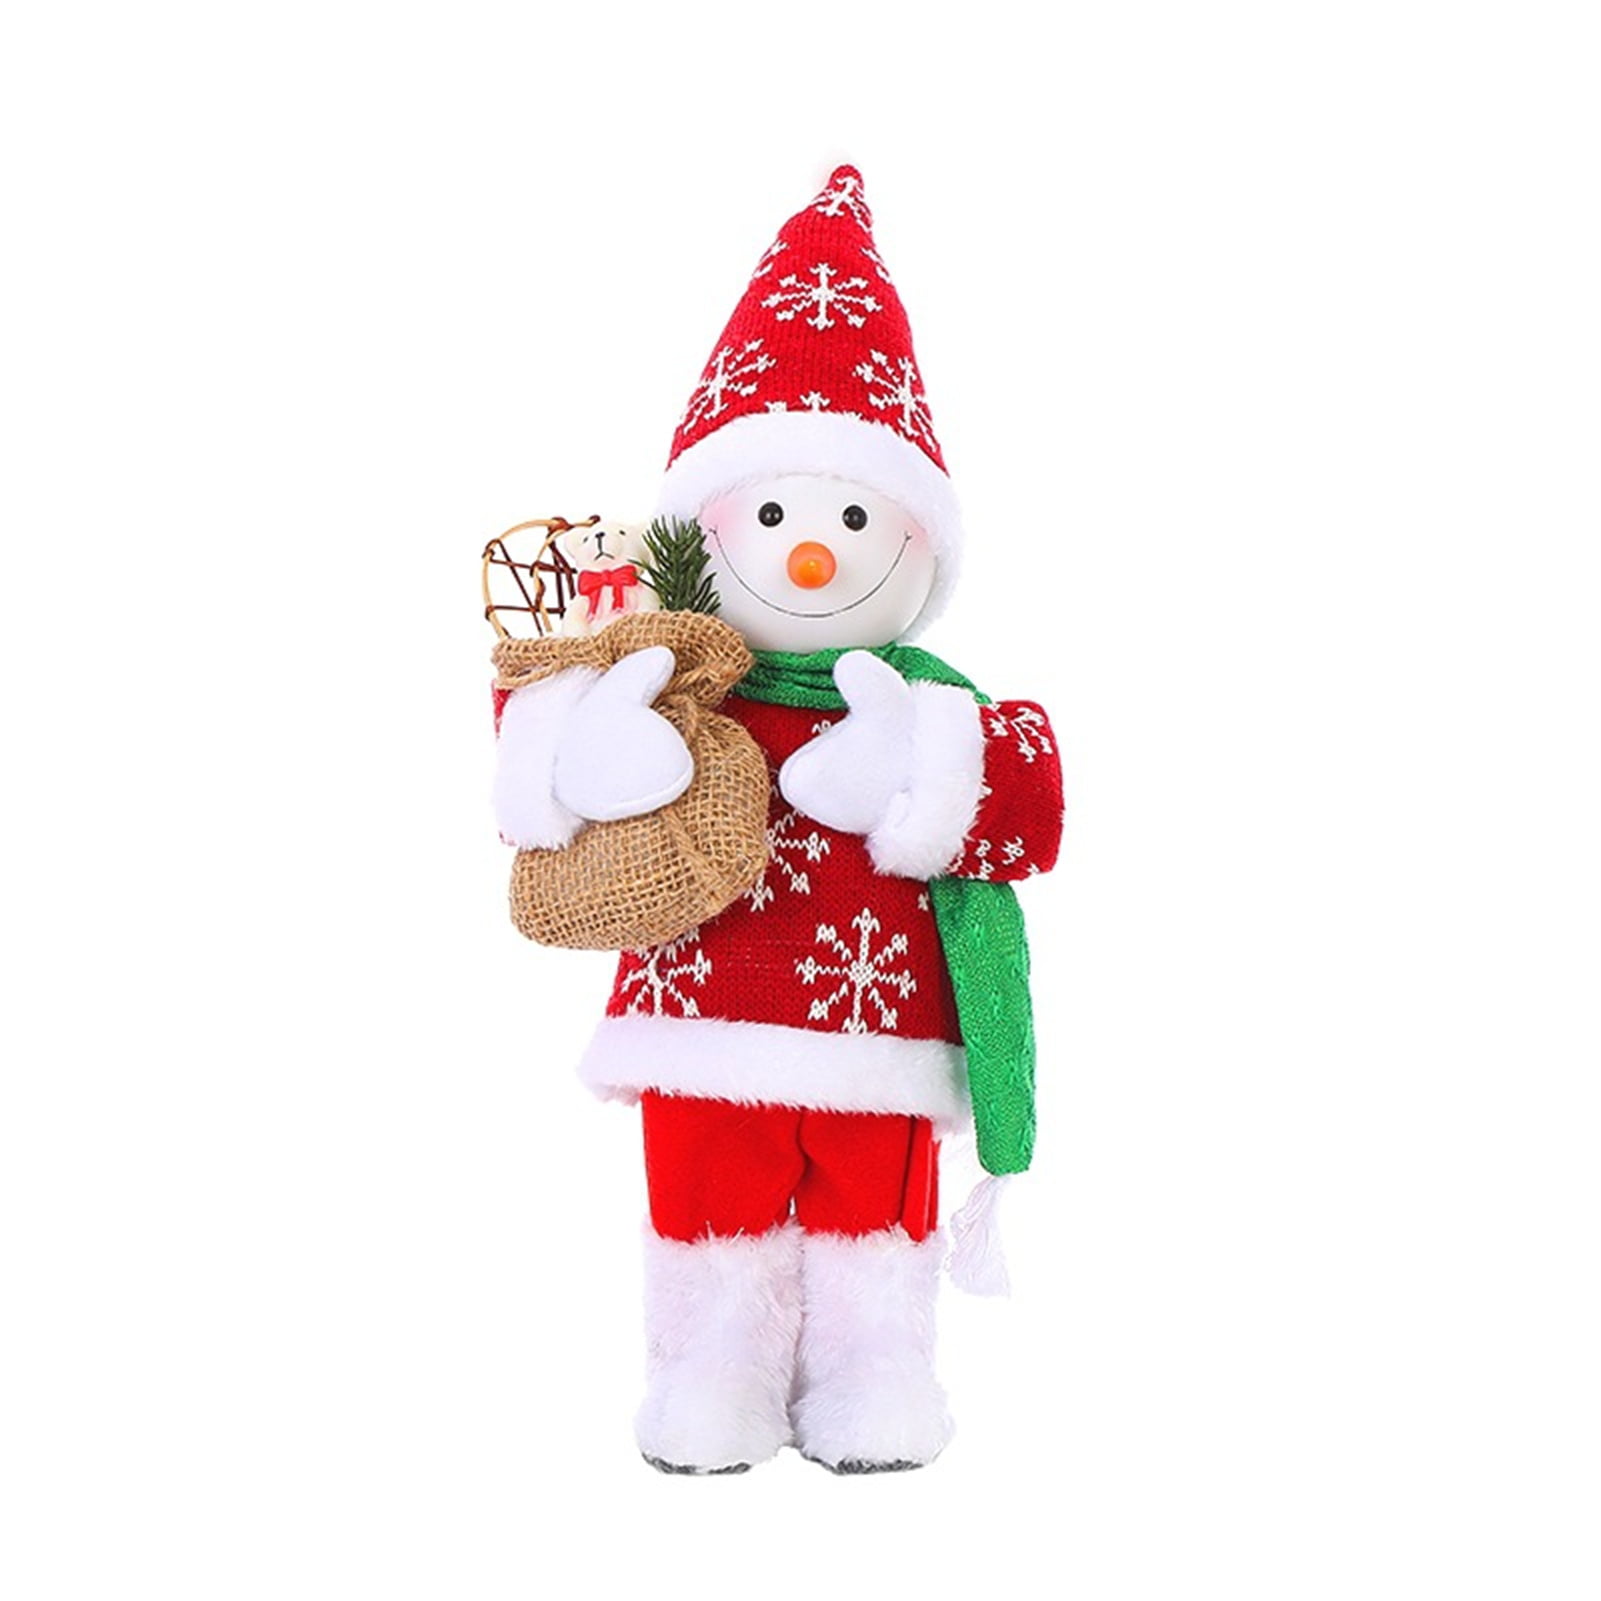 YING LING CRAFTS Christmas Snowman Doll Decoration Snowmen Stuffed Animal Plush Decor Home Holiday Festival Party Gift with Merry Christmas